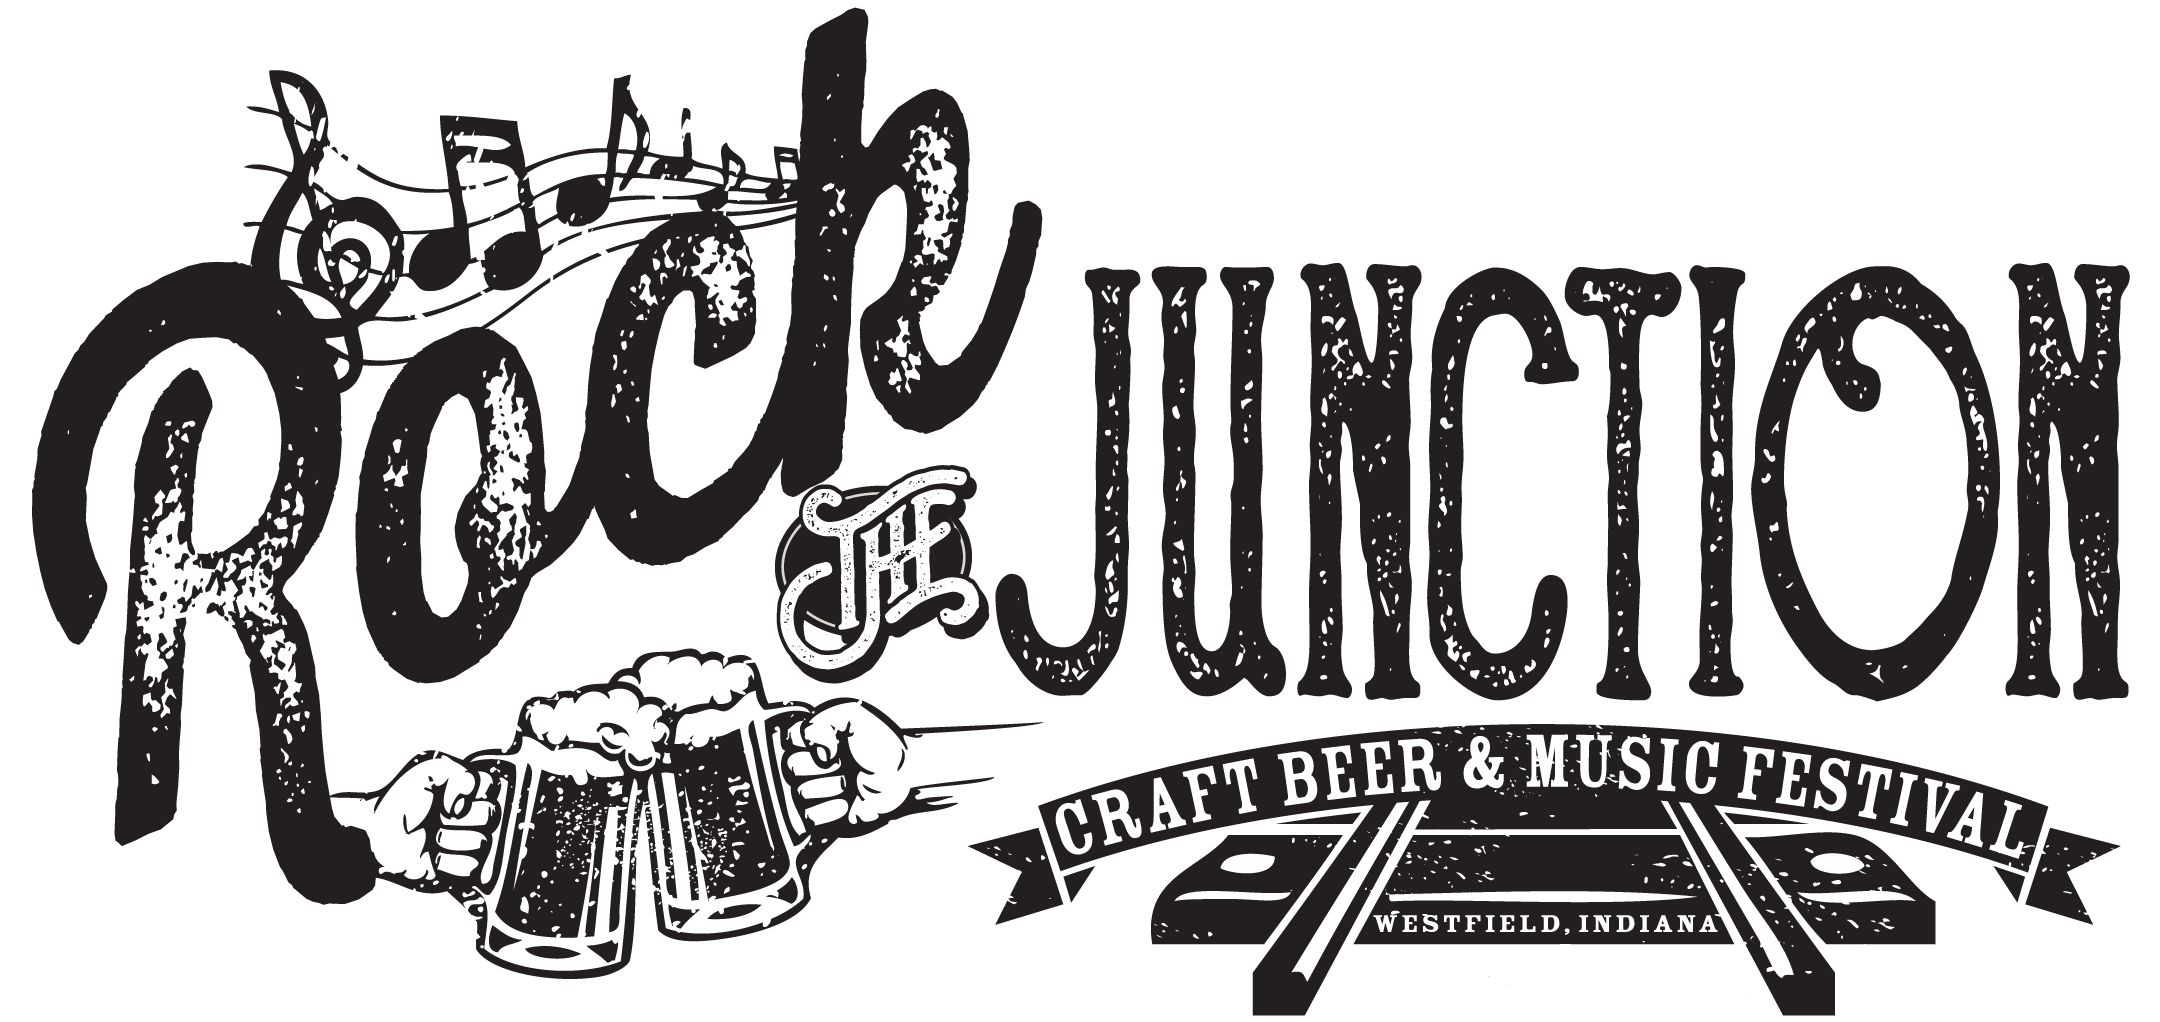 Indiana on Tap Rock The Junction in Westfield Really Rocks for Charity